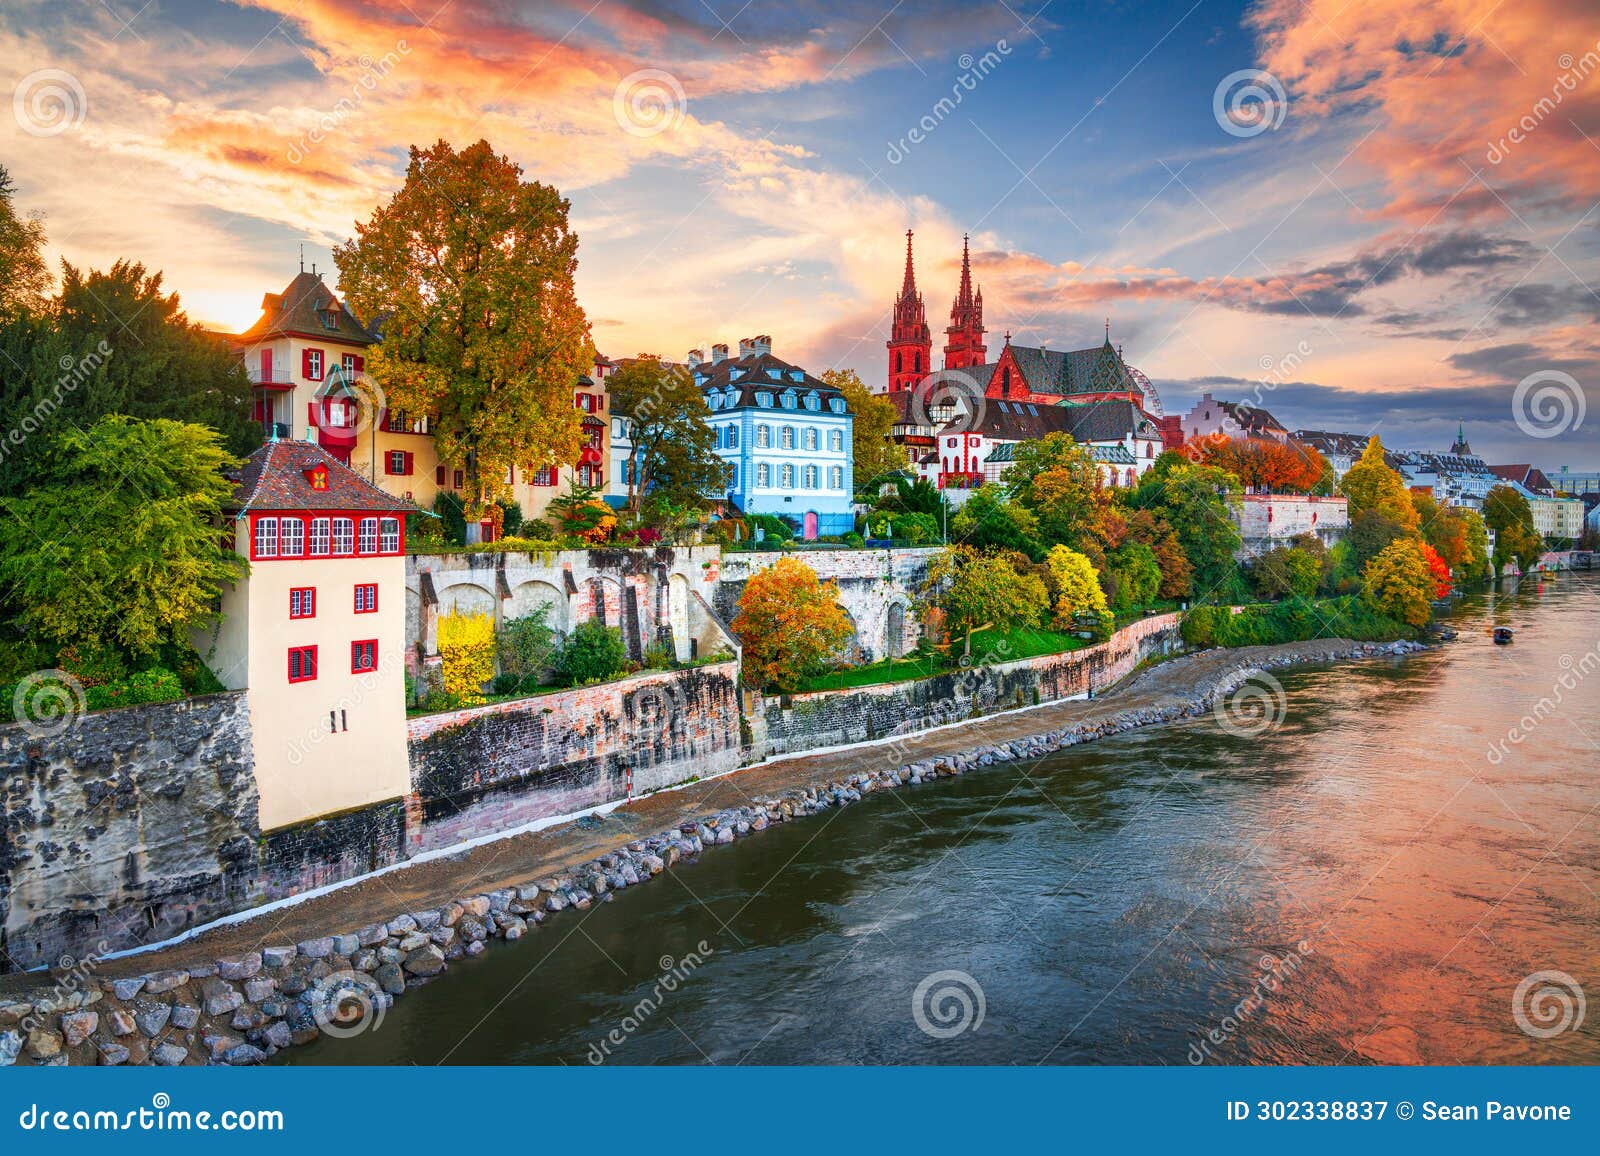 basel, switzerland on the rhine river at dusk in autumn